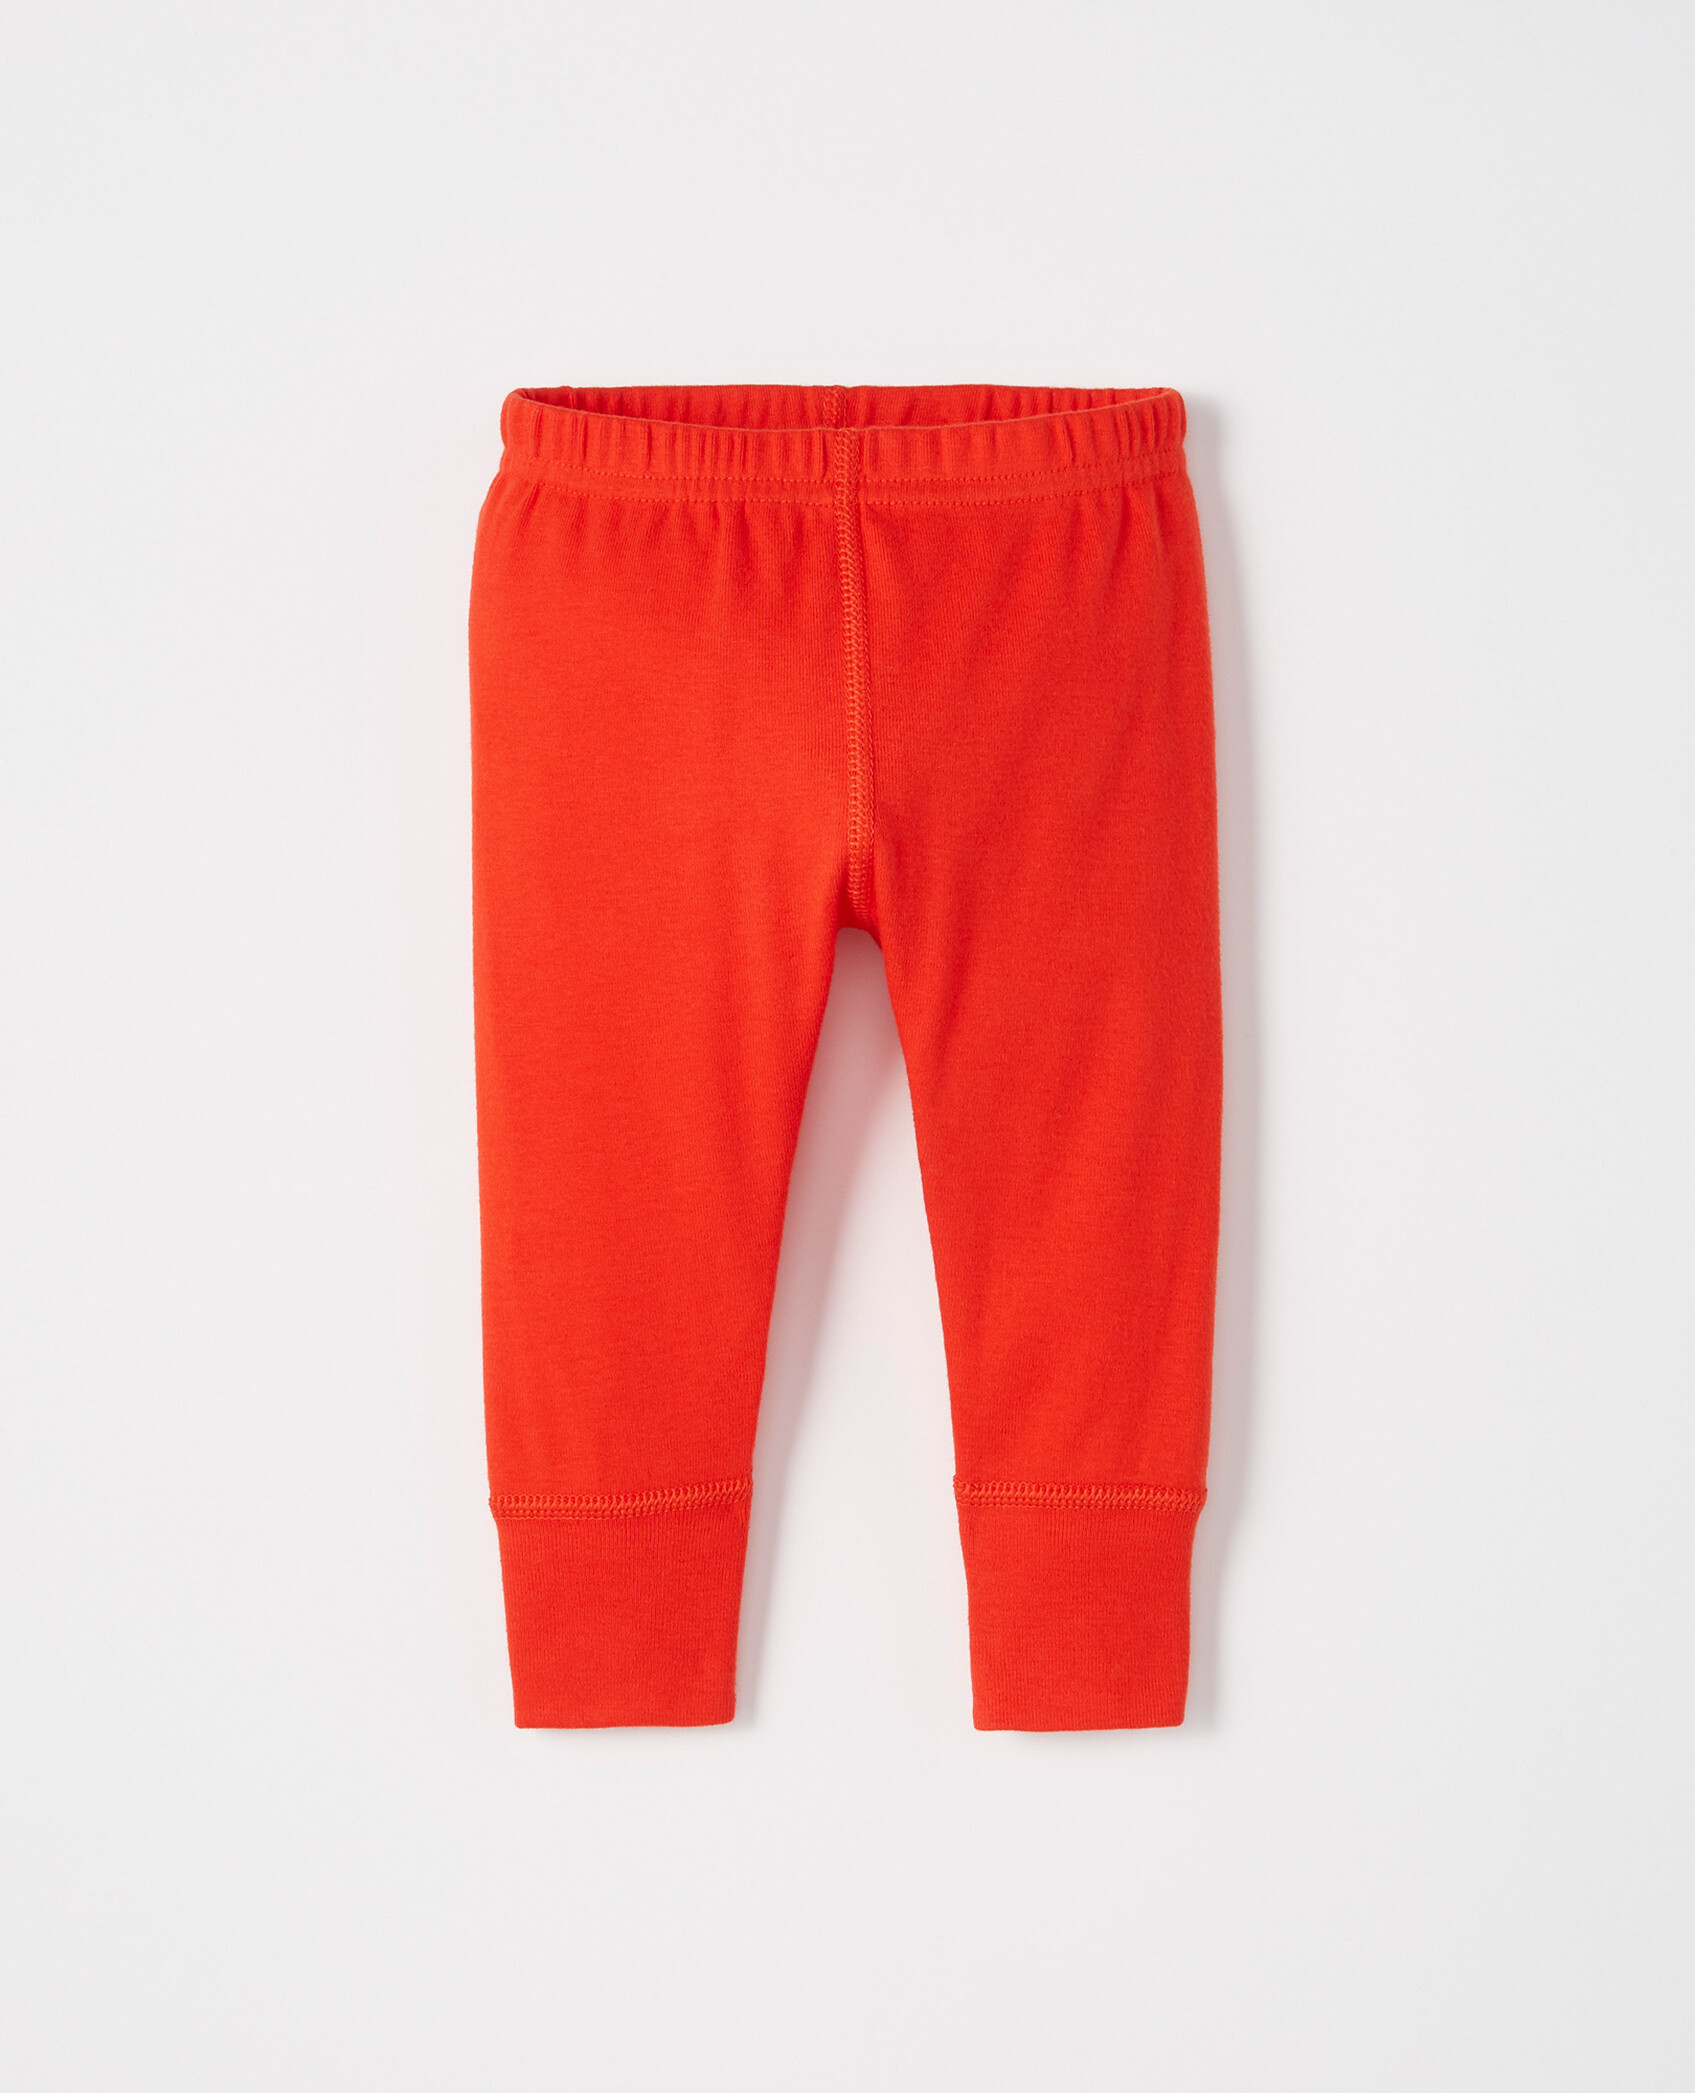 Bright Basics Wiggle Pants In Organic Cotton | Hanna Andersson